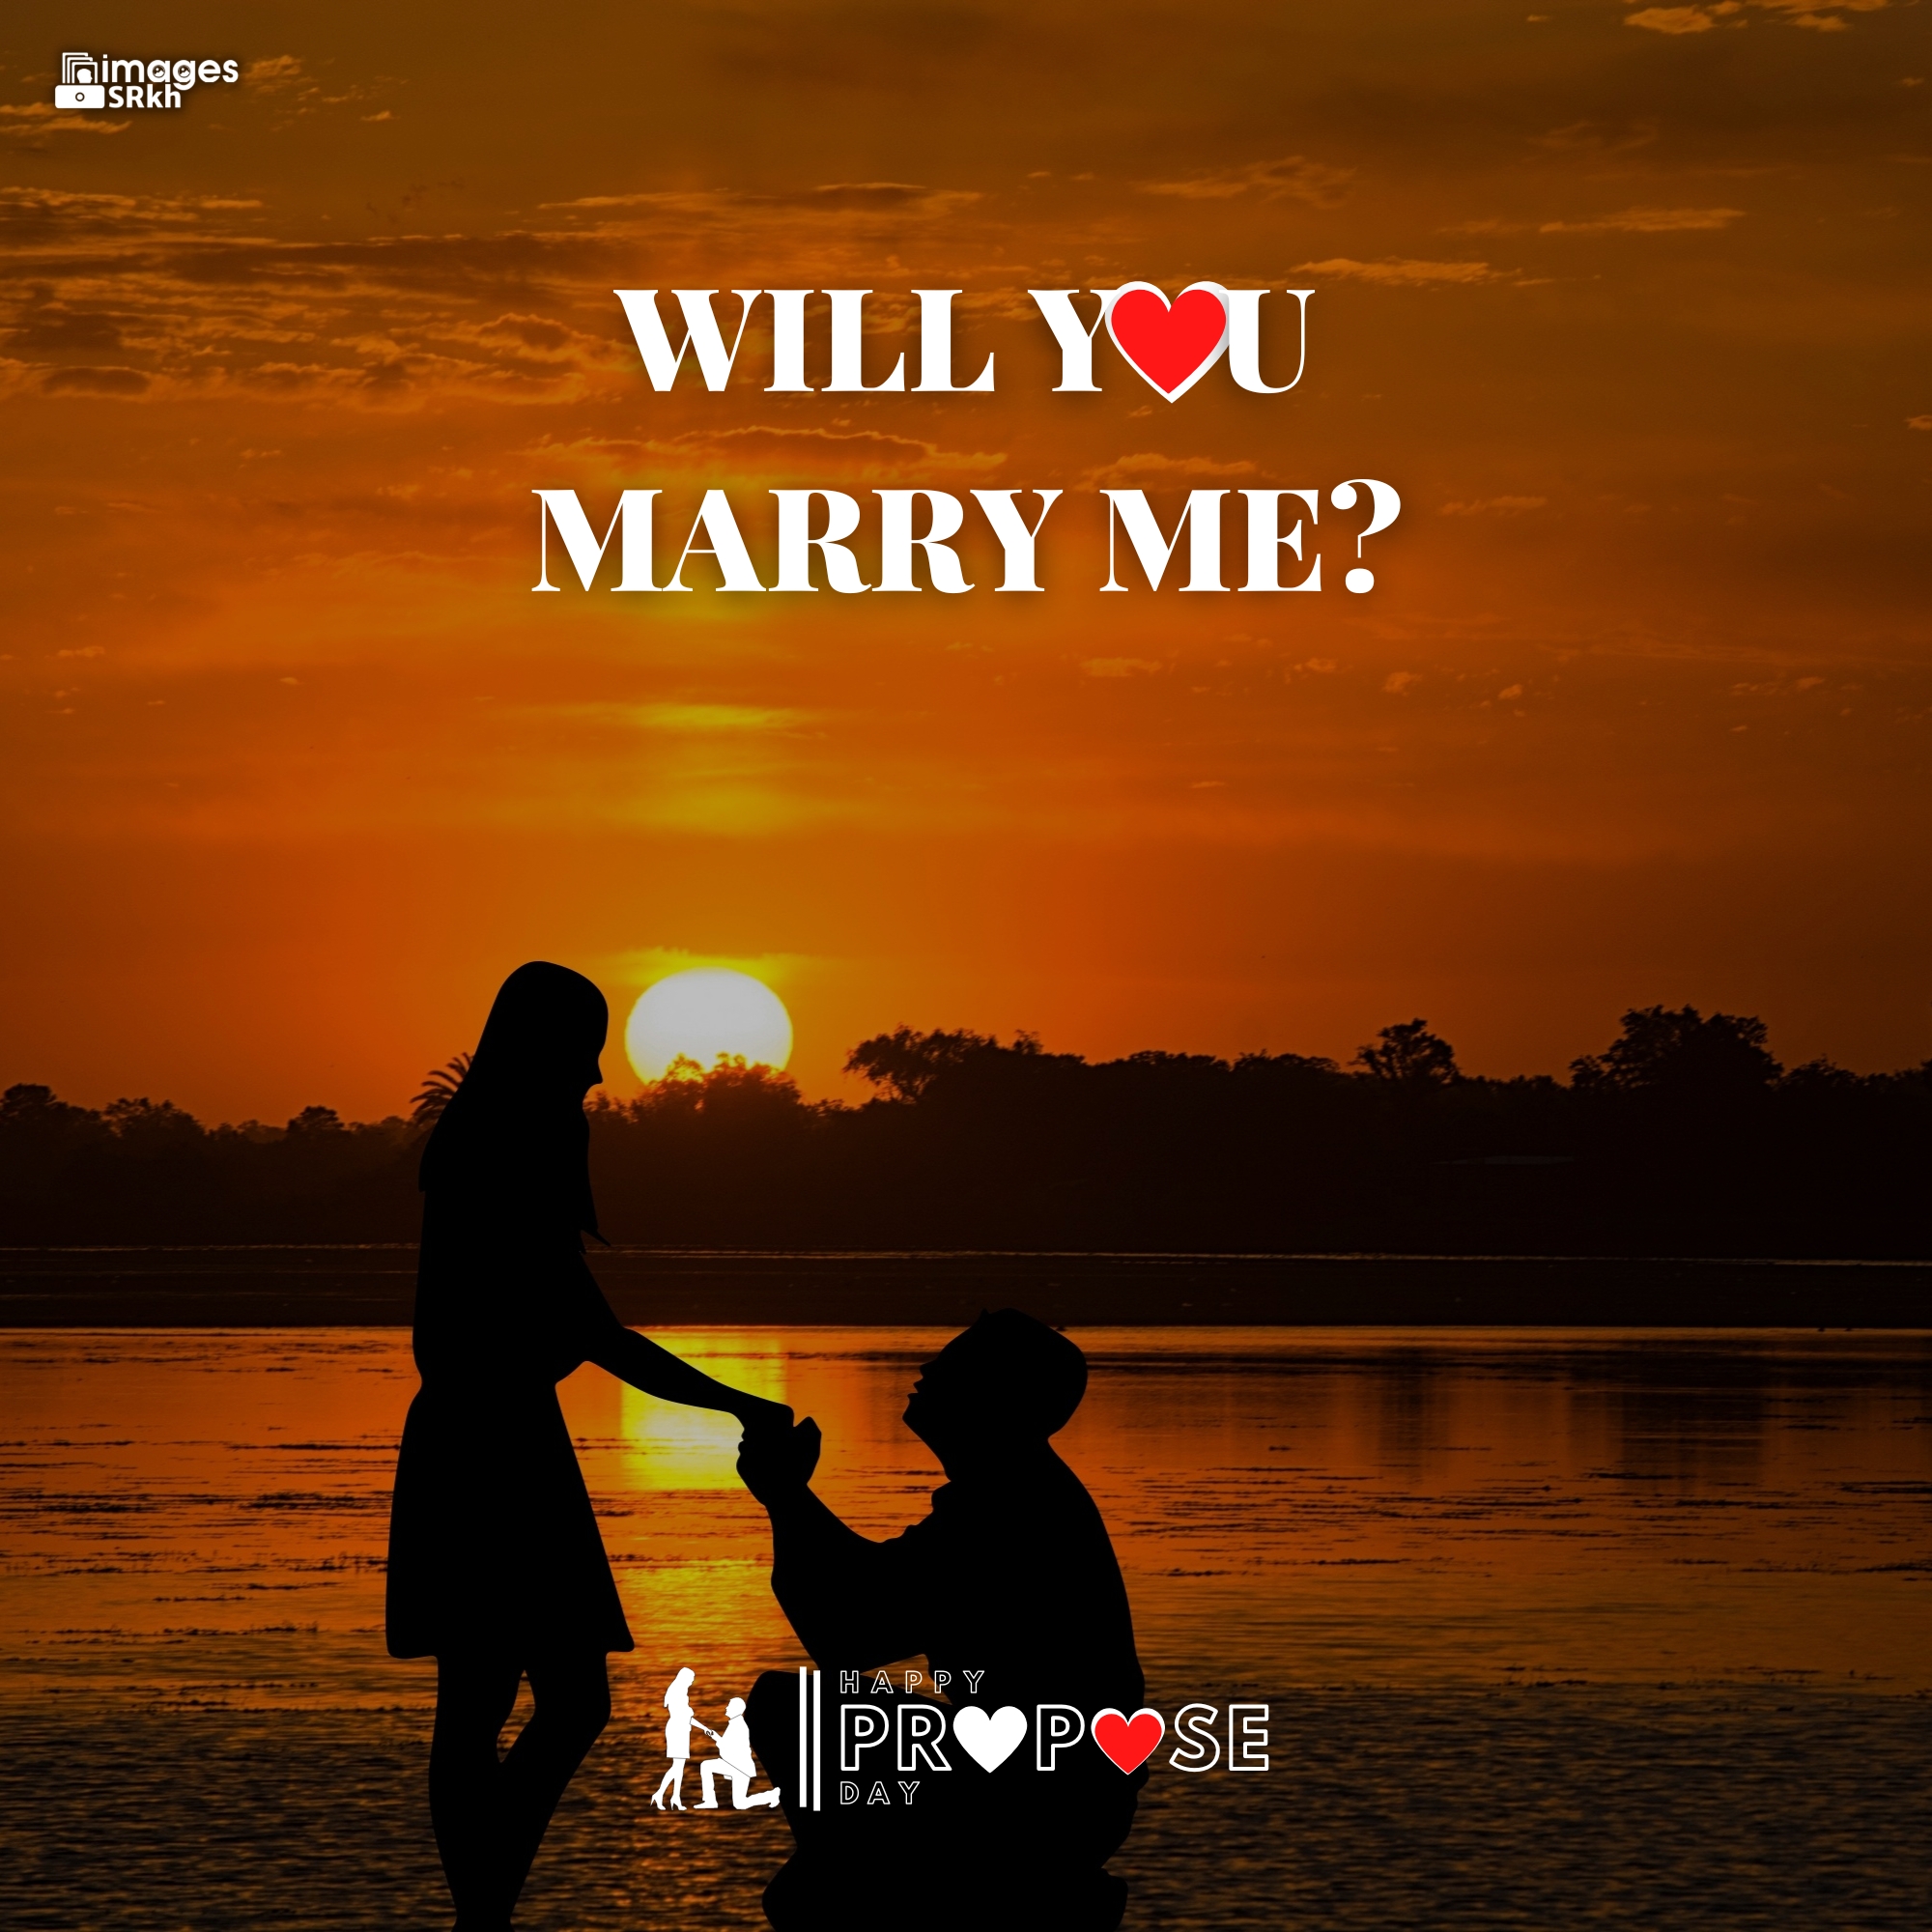 Propose Day Images | 263 | Will You MARRY ME